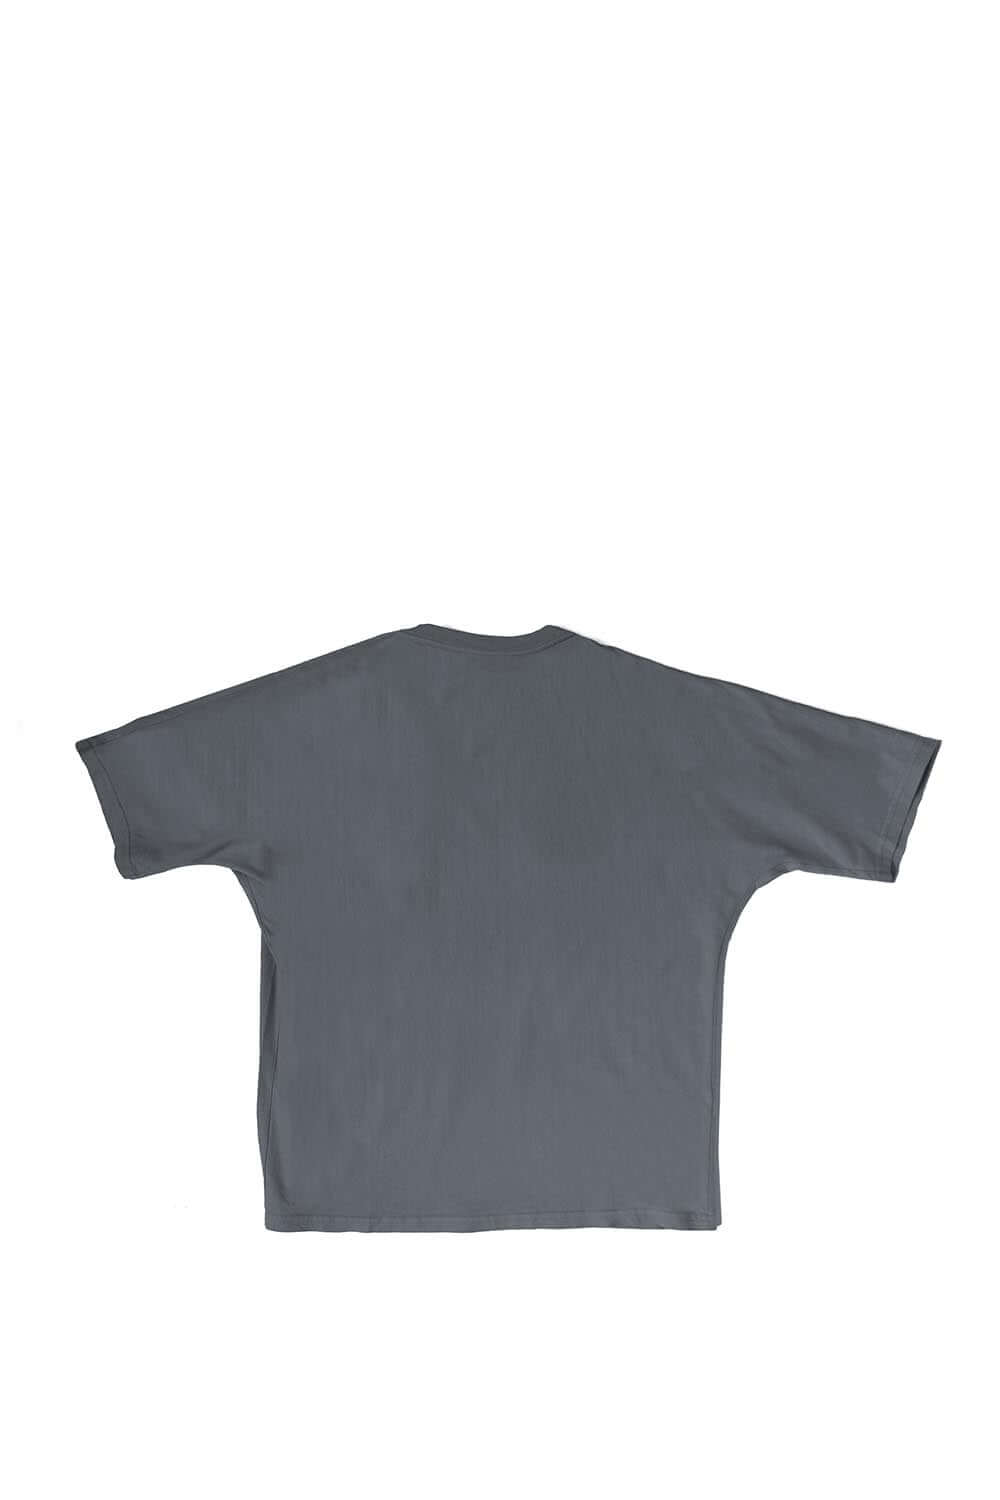 HTC LIL STORM T-SHIRT t-shirts with a Japanese fit, they have no shoulder seam and the fabric has been specially developed. In addition to the comfortable feel, this fabric, called twisted, allows for greater resilience. HTC LOS ANGELES